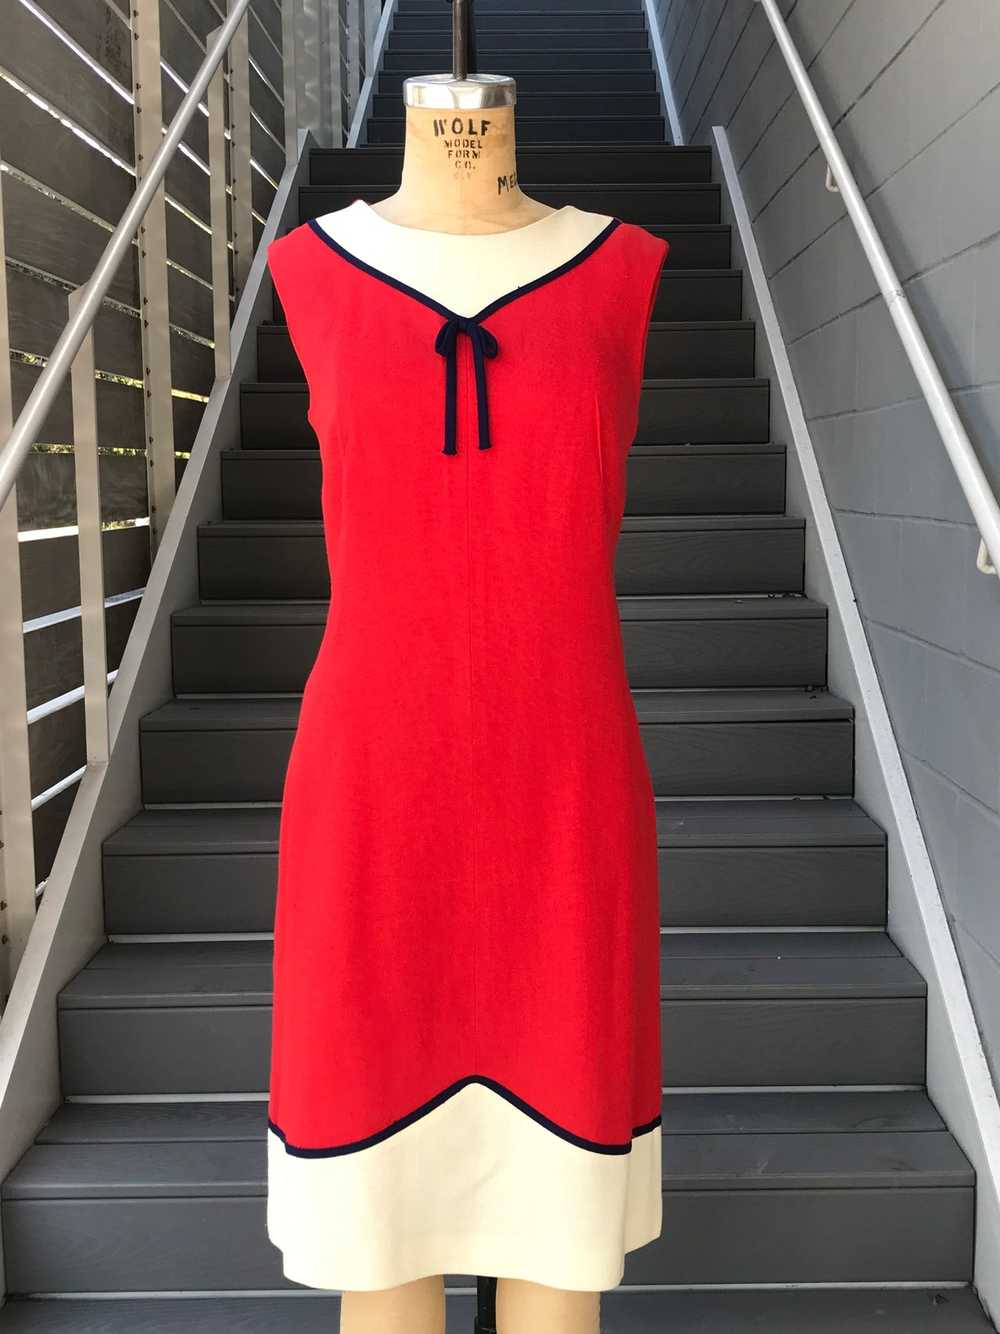 1960’s Red and White Sleeveless Dress - image 6